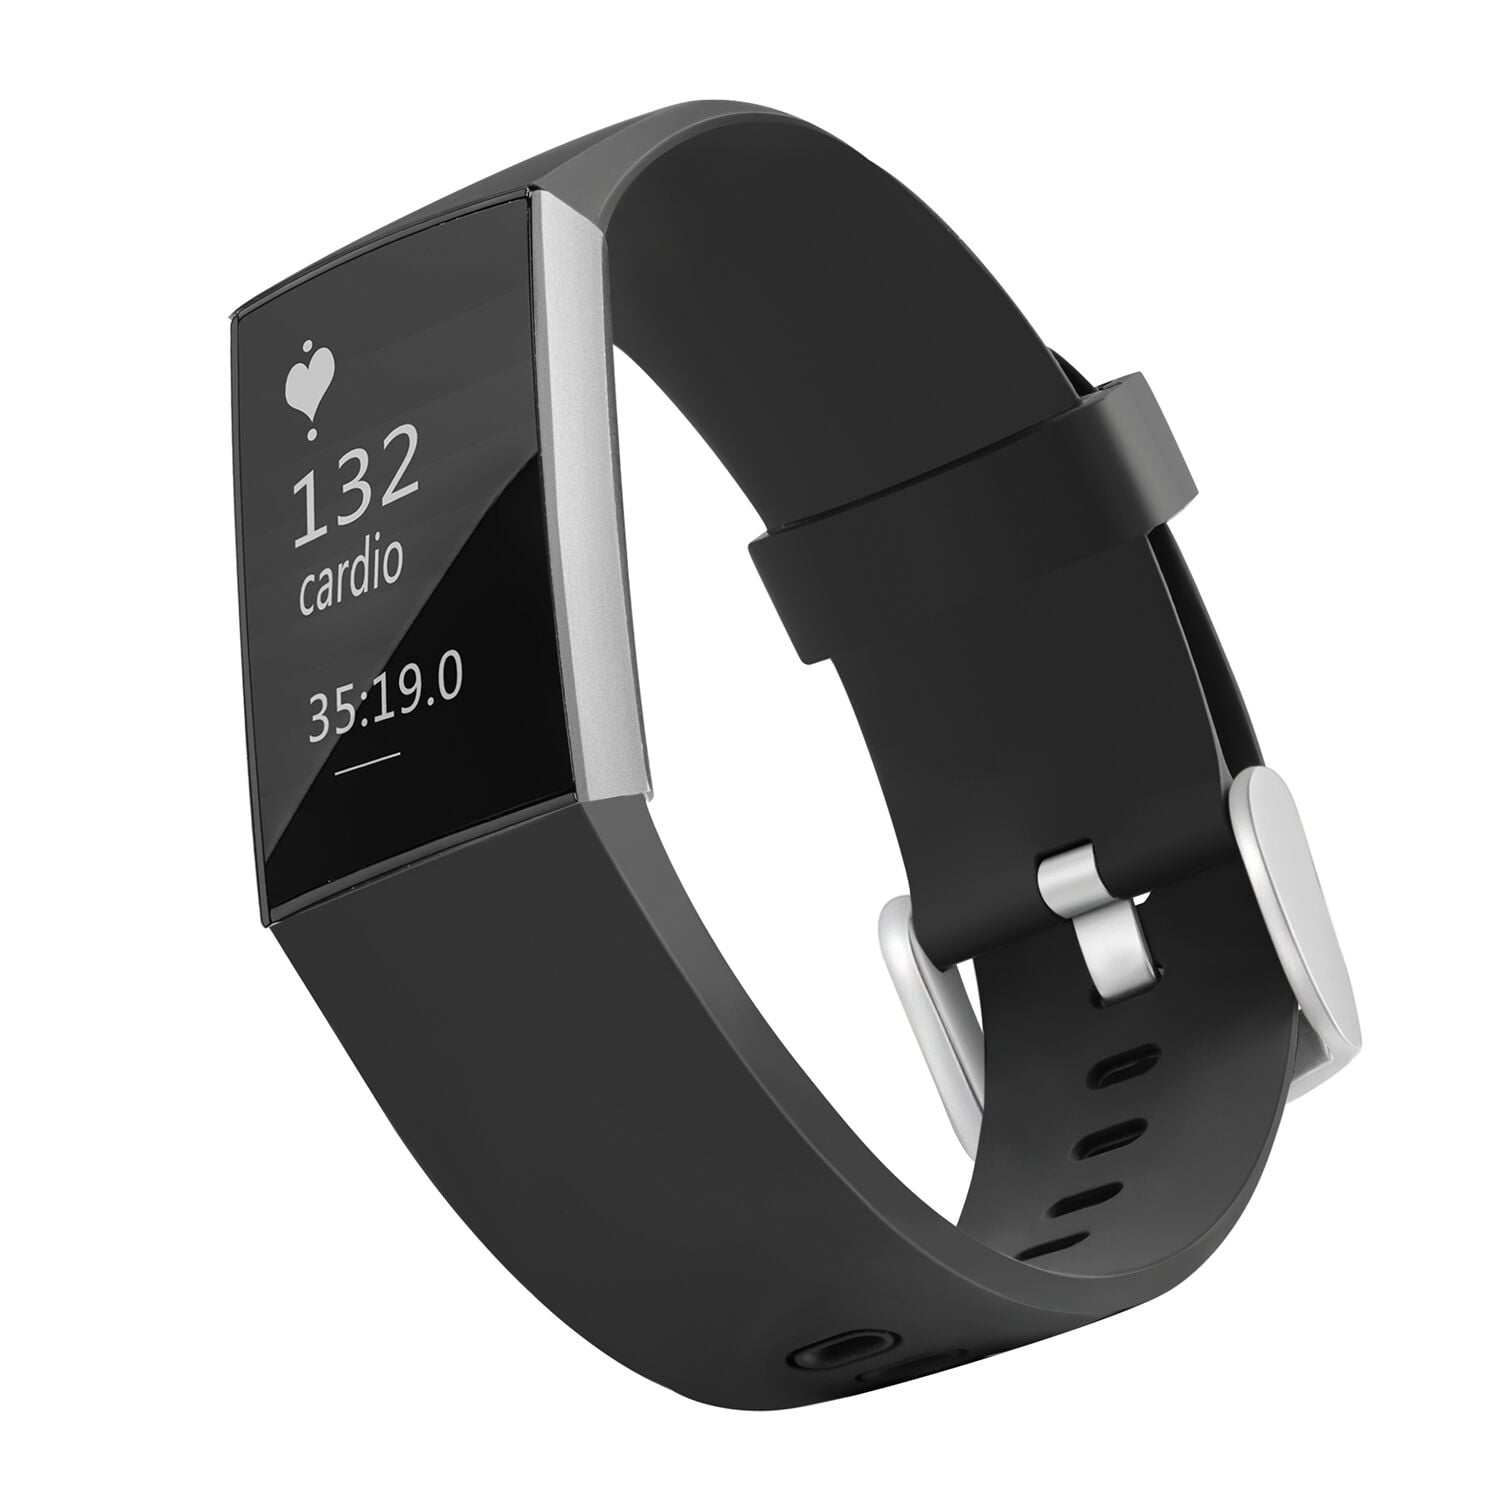 FITBIT CHARGE Wristband Fitness Activity Tracker Black 